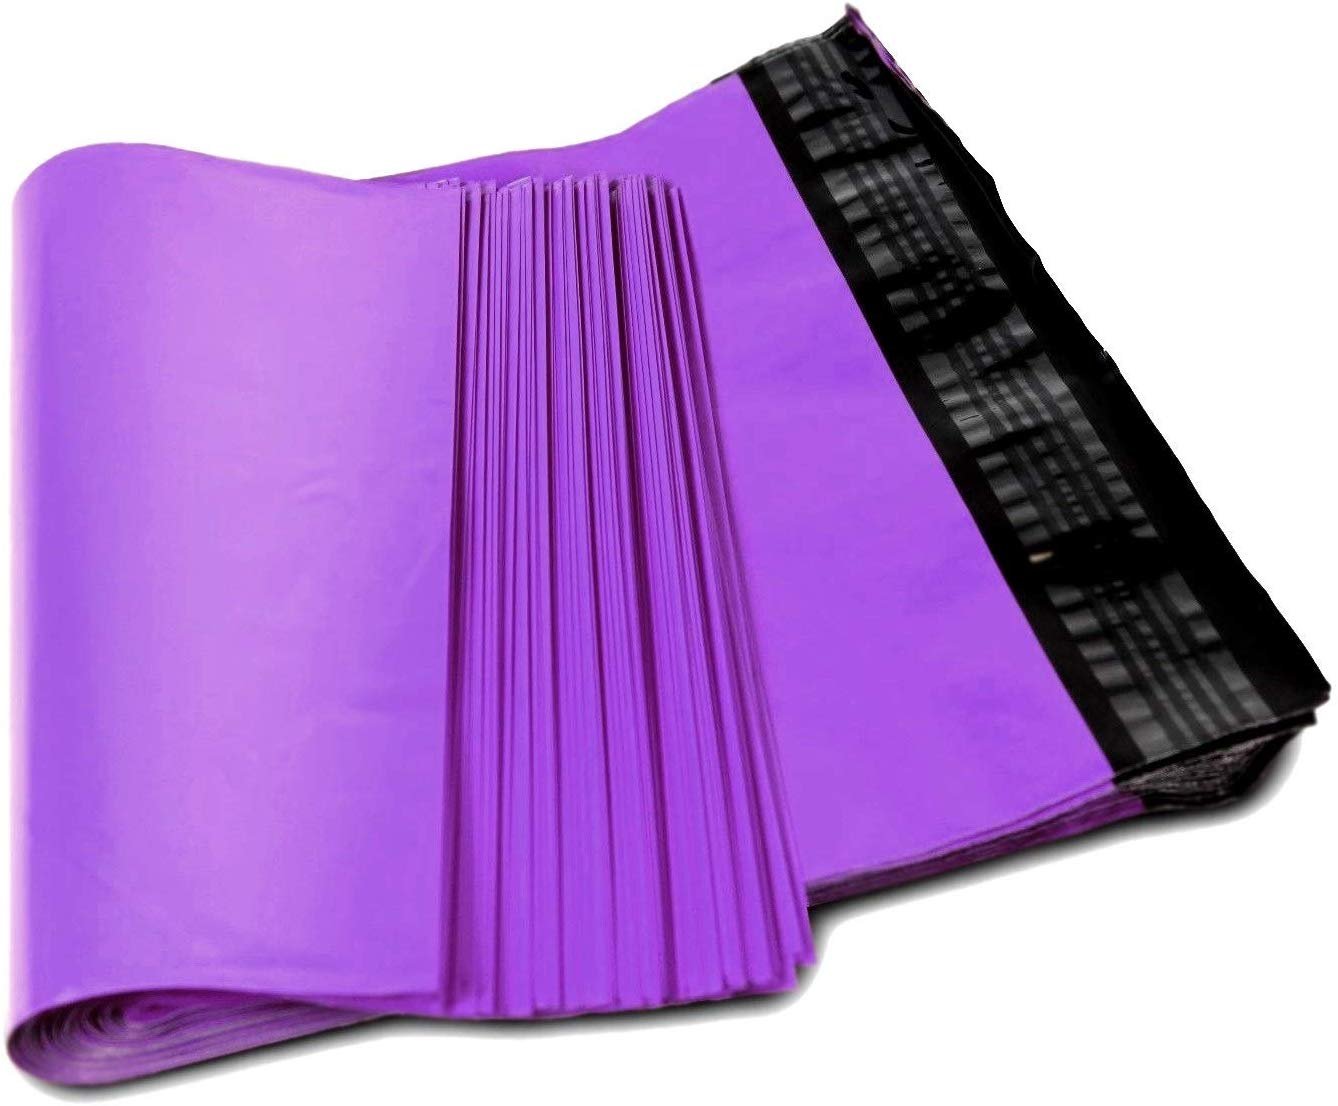 100 6x9 Purple Poly Mailer Plastic Shipping Envelopes Polybags Polymailer 2.5MIL 